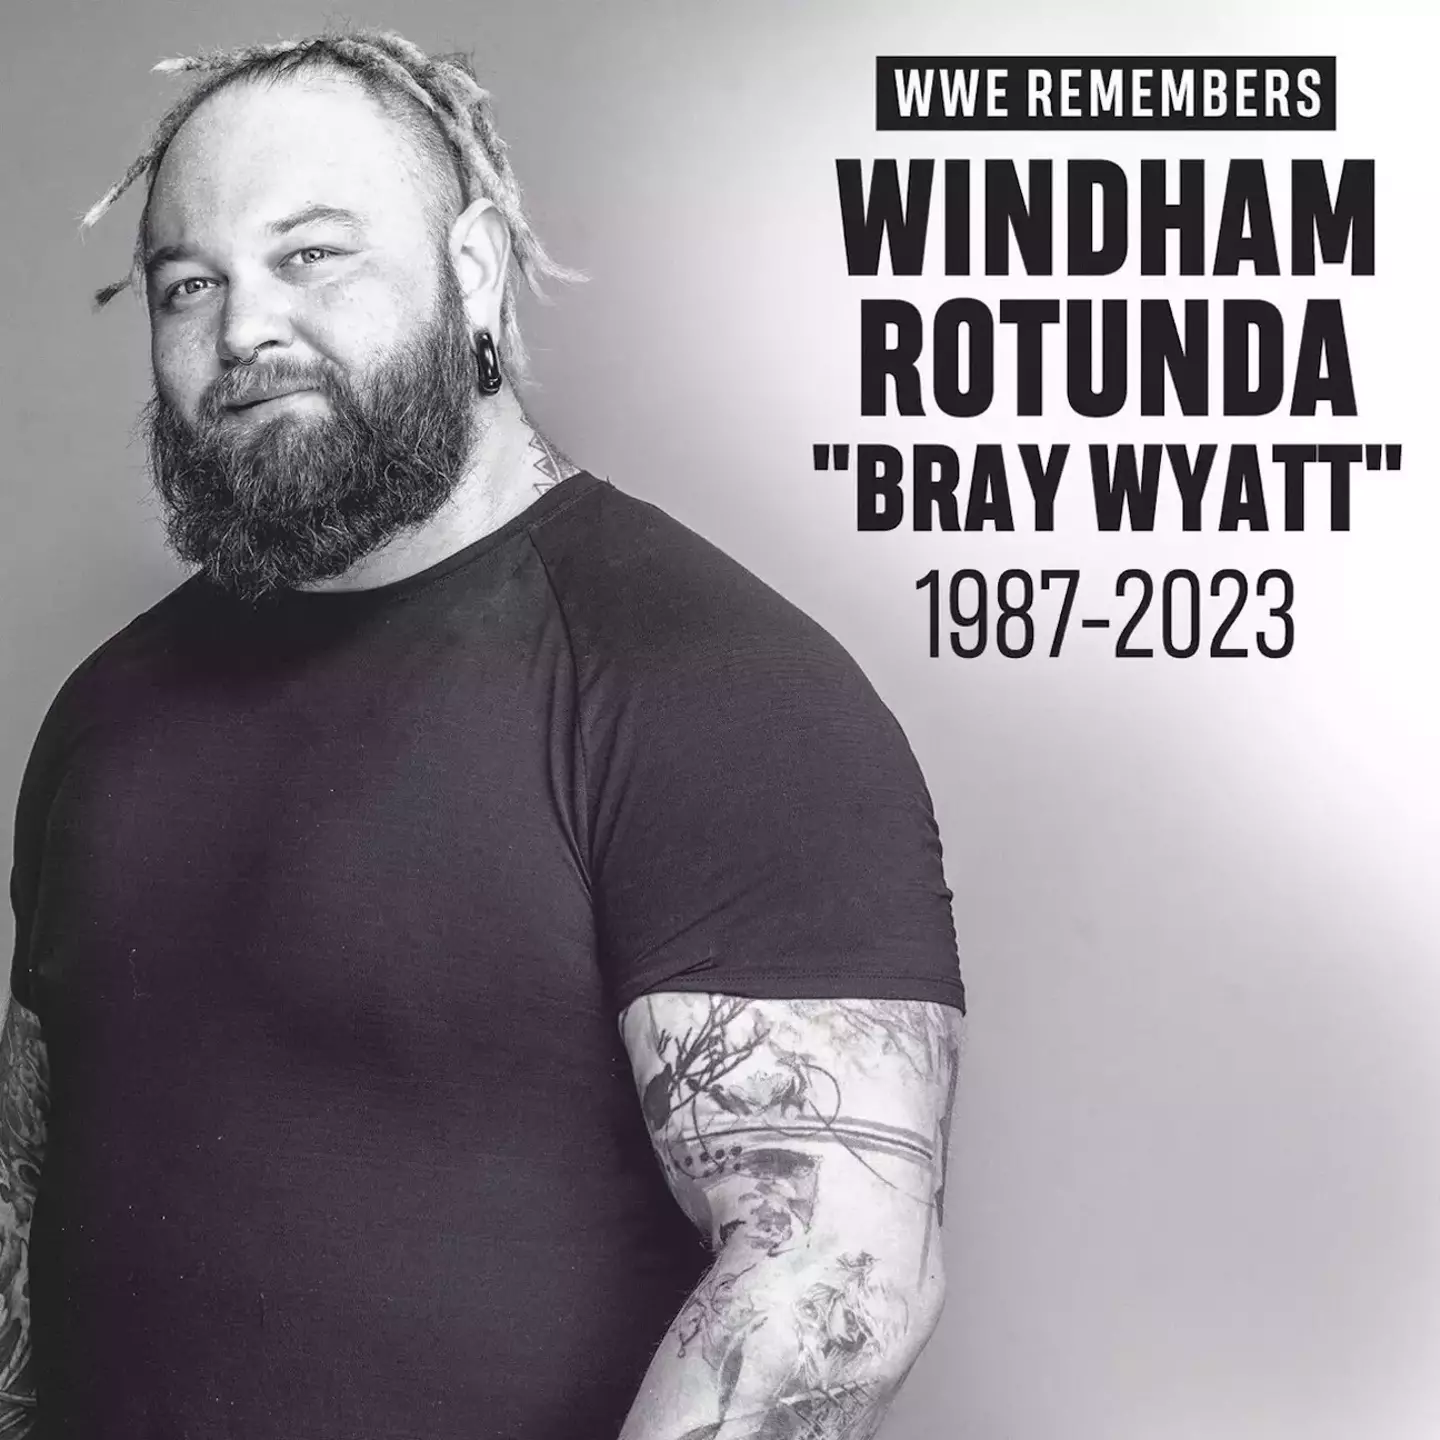 WWE star Bray Wyatt suddenly passed away on Thursday, 24 August at the age of 36.